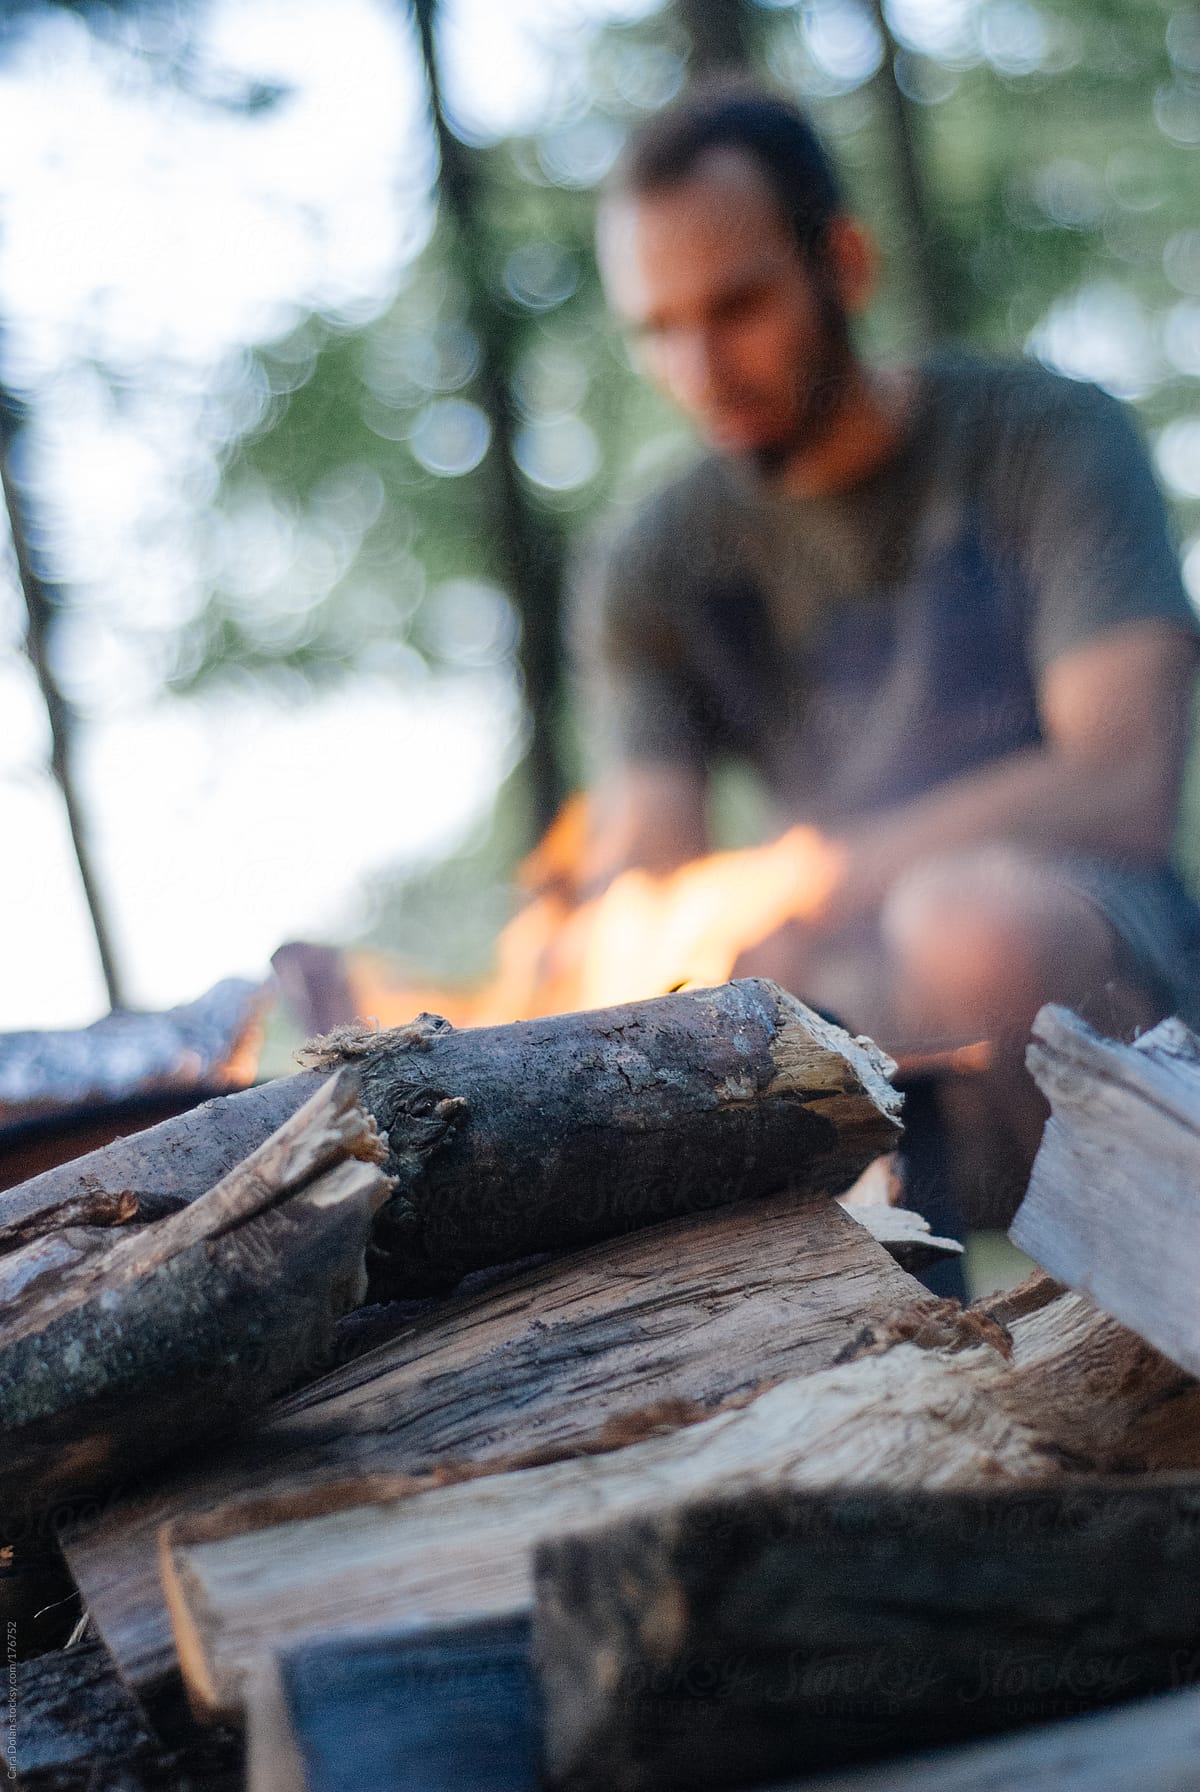 Man sits tending to a campfire, with firewood in foreground